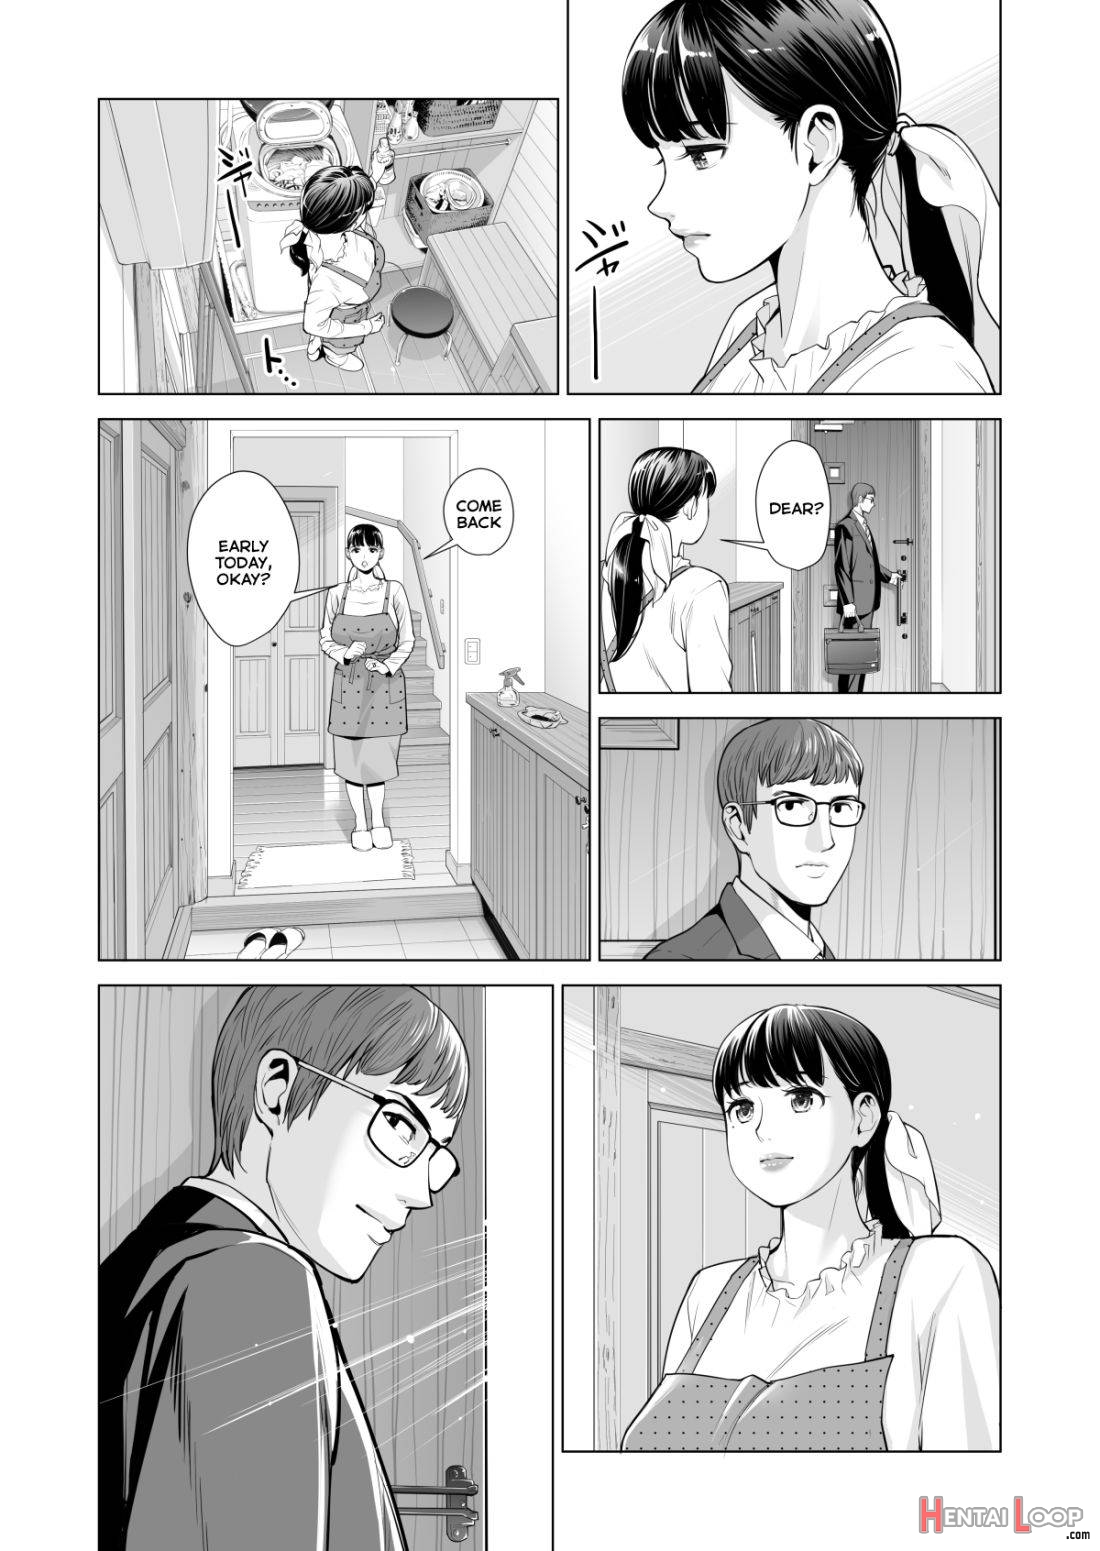 Tsukiyo no Midare Zake (Zenpen) Moonlit Intoxication ~ A Housewife Stolen by a Coworker Besides her Blackout Drunk Husband ~ Chapter 1 page 6